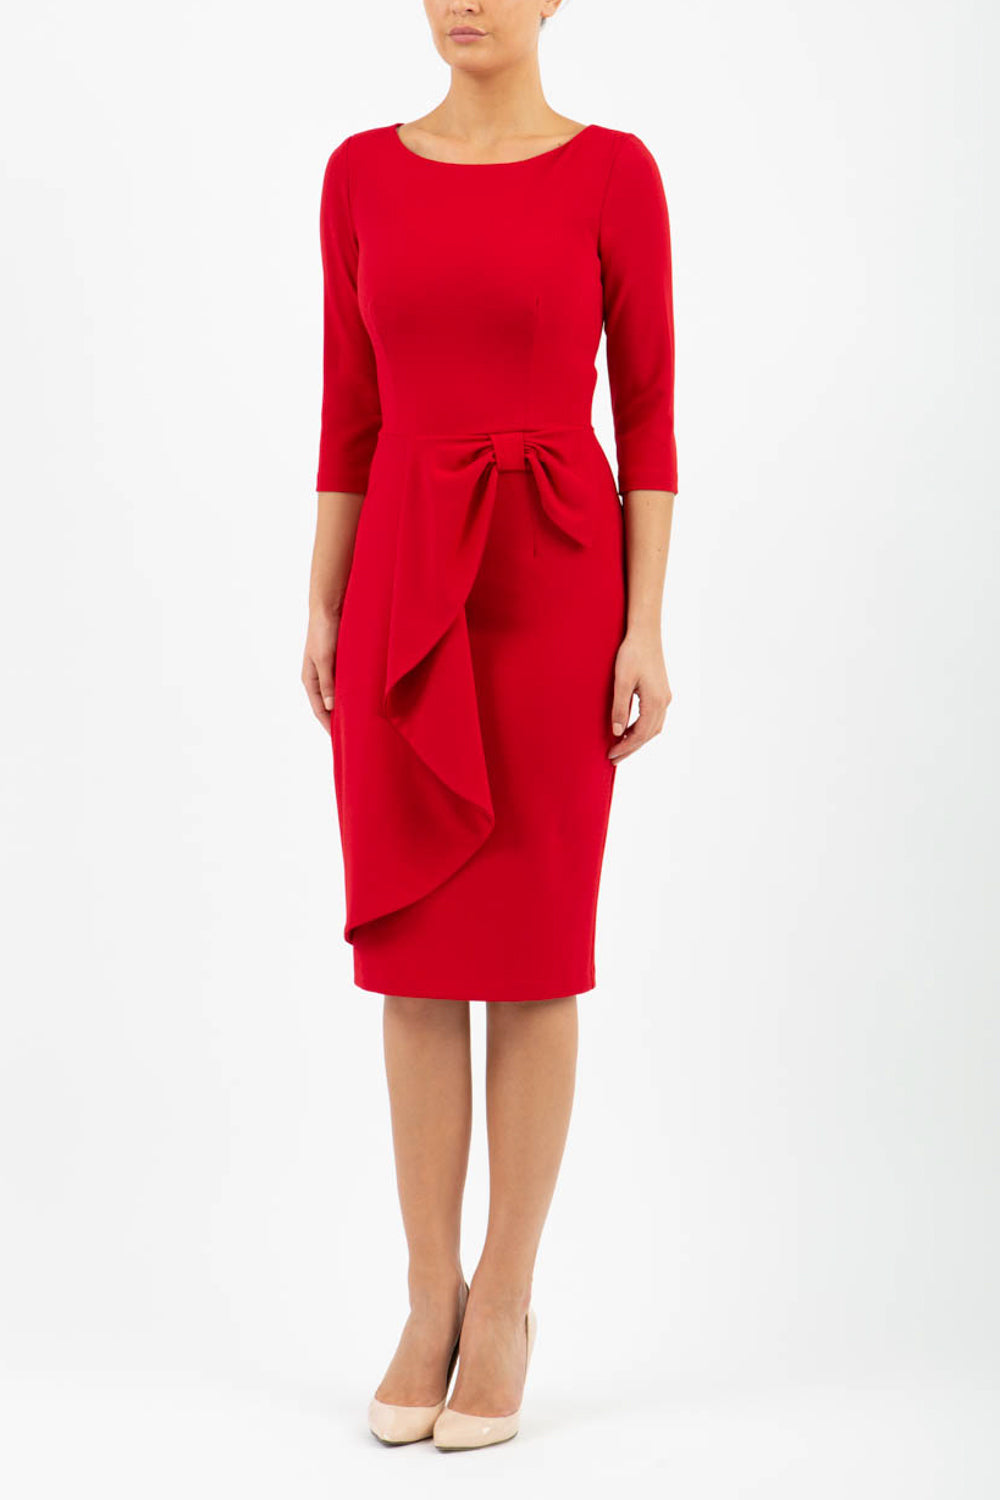 model is wearing diva catwalk jacky dress with rounded neckline 3/4 sleeve and bow detail on the waist in scarlet red front 